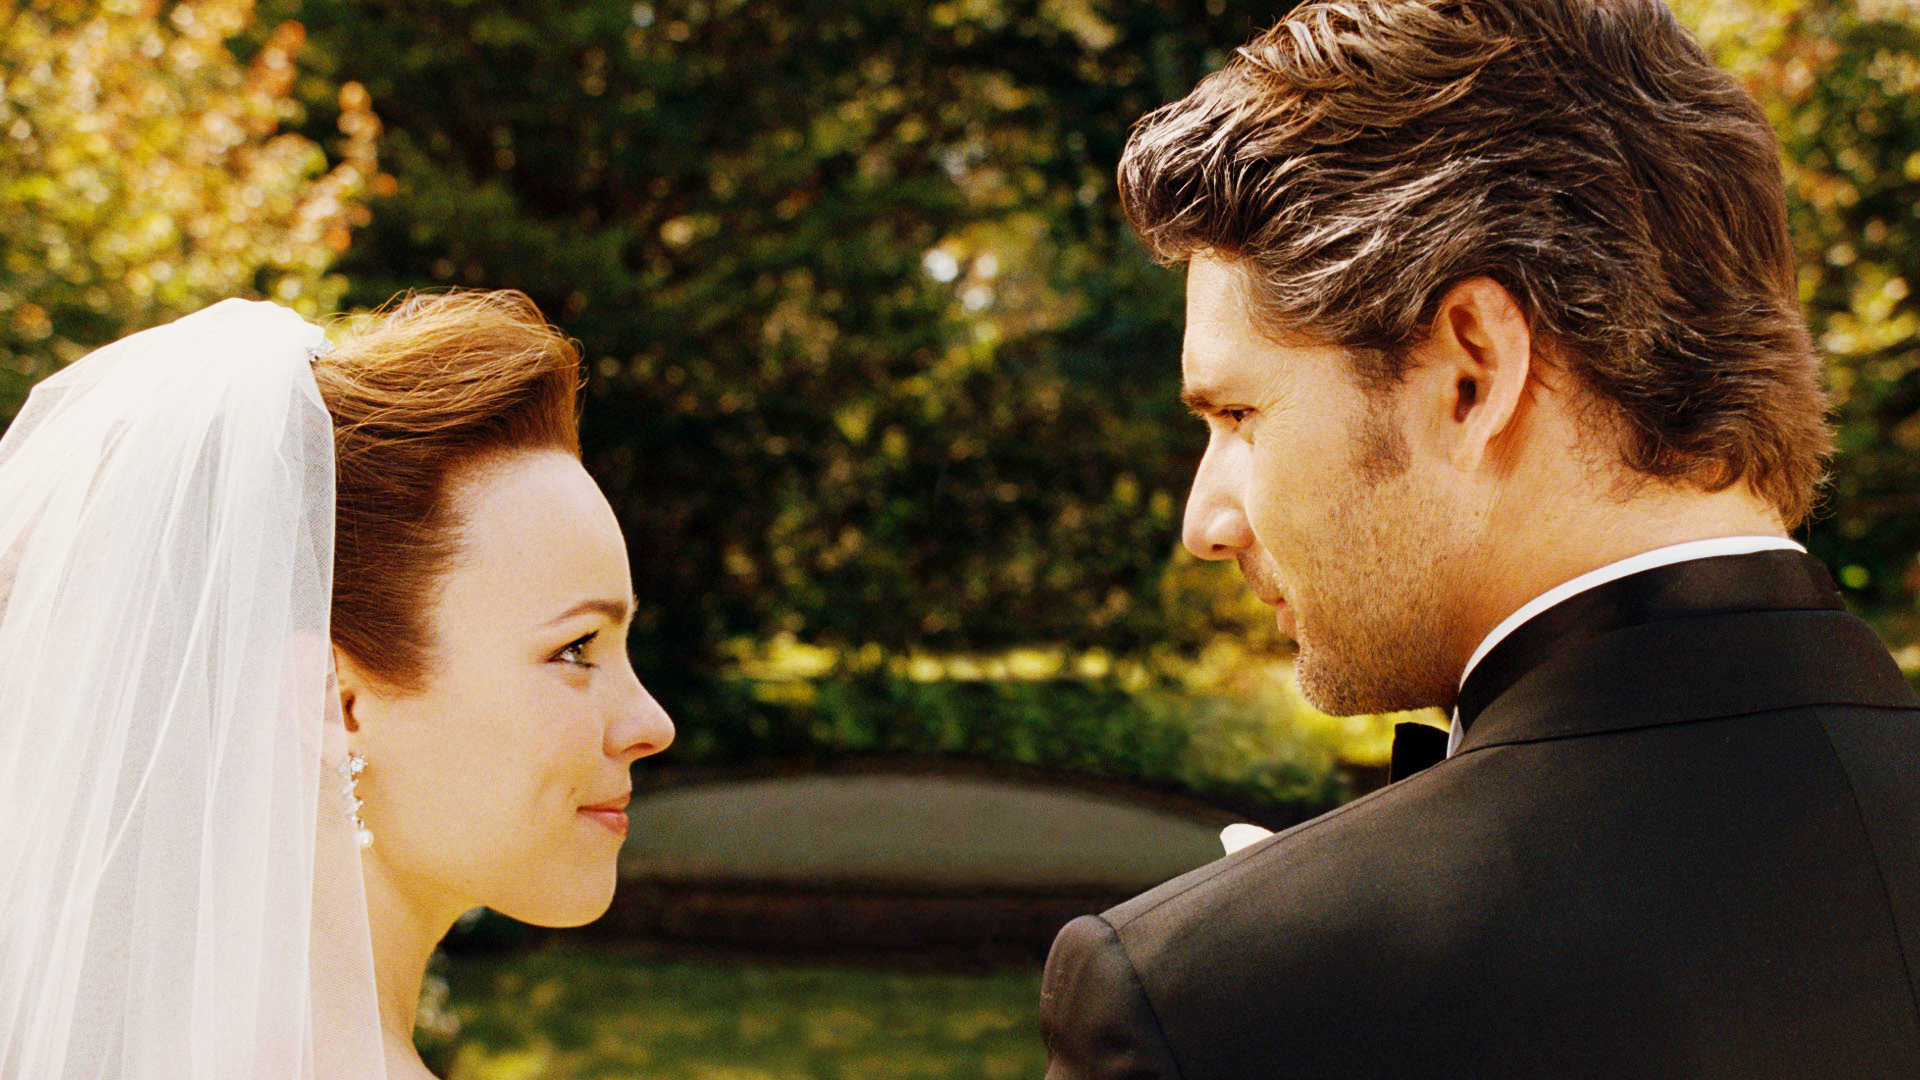 Rachel McAdams stars as Clare Abshire and Eric Bana stars as Henry DeTamble in New Line Cinema's The Time Traveler's Wife (2009)